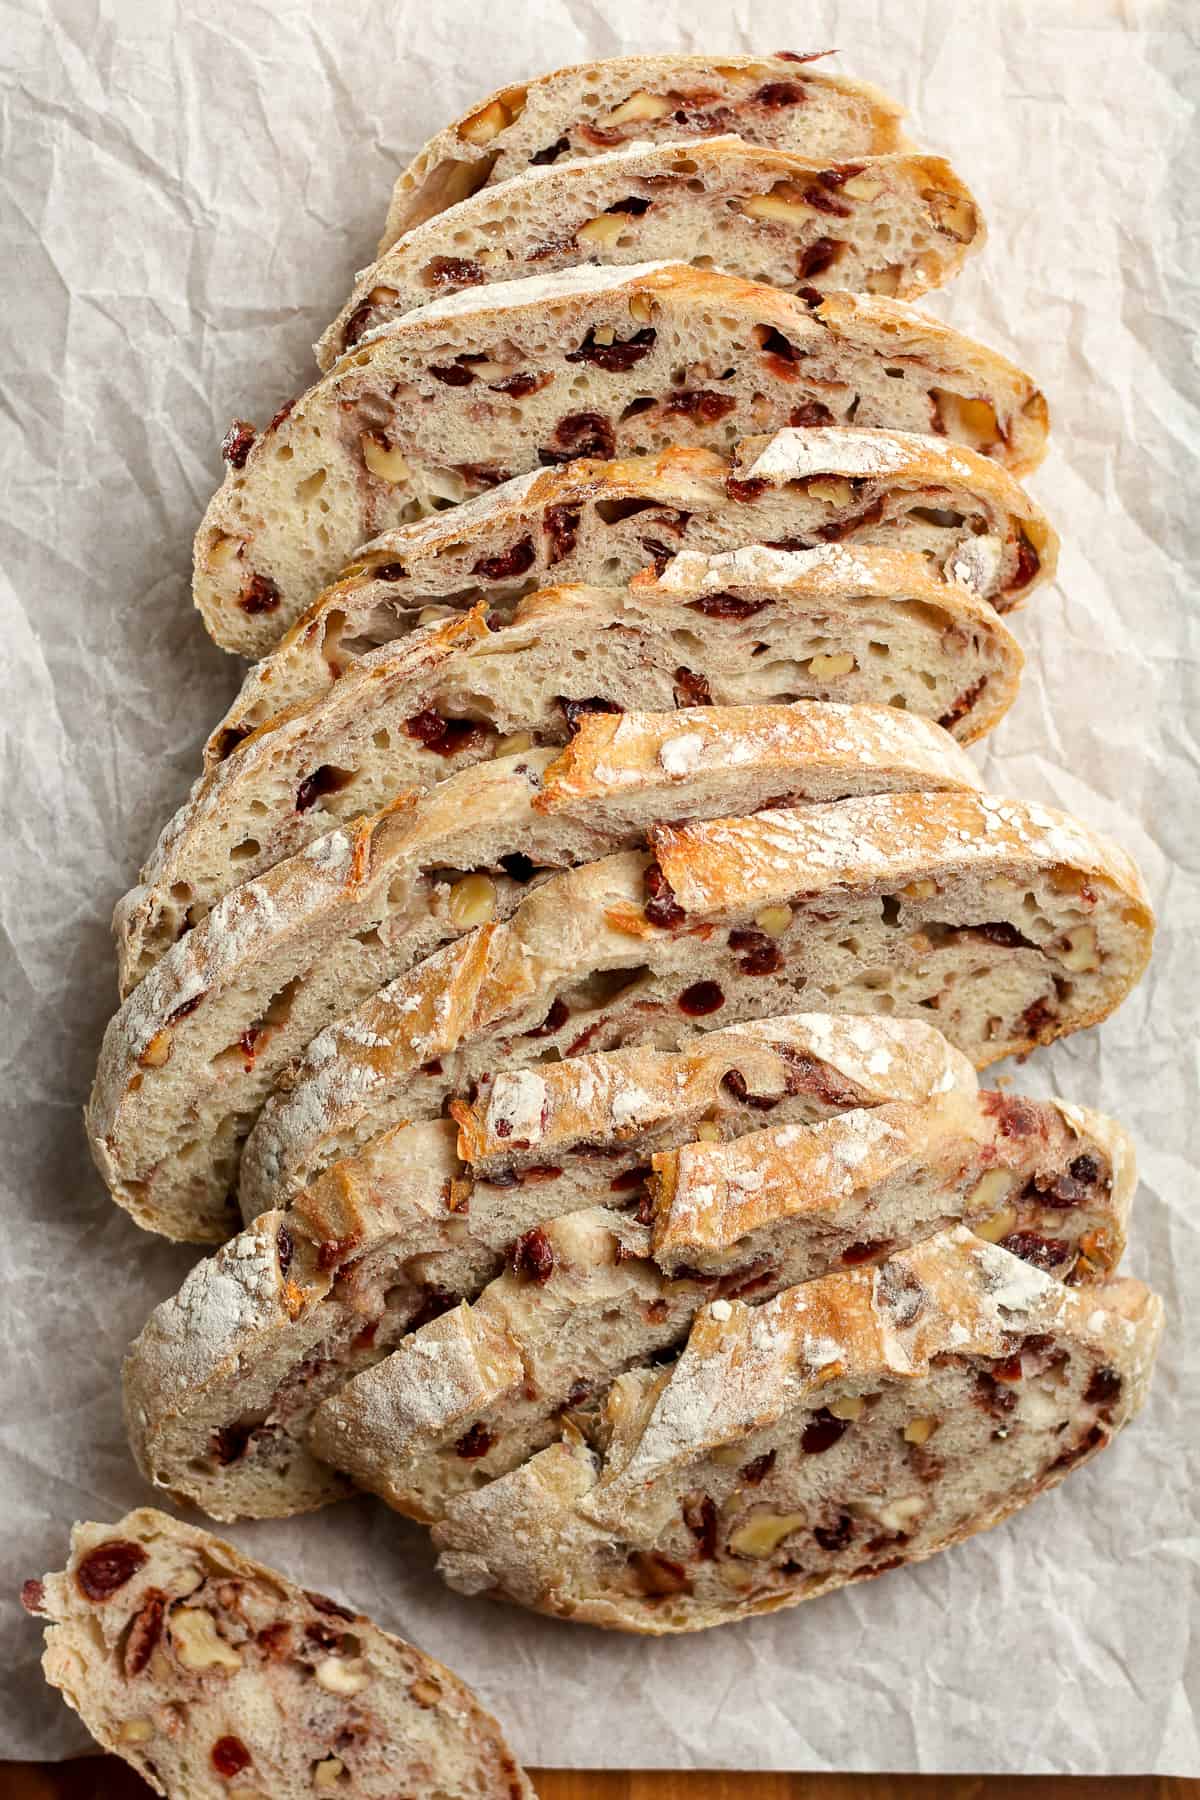 Overview of some sliced cranberry sourdough bread.